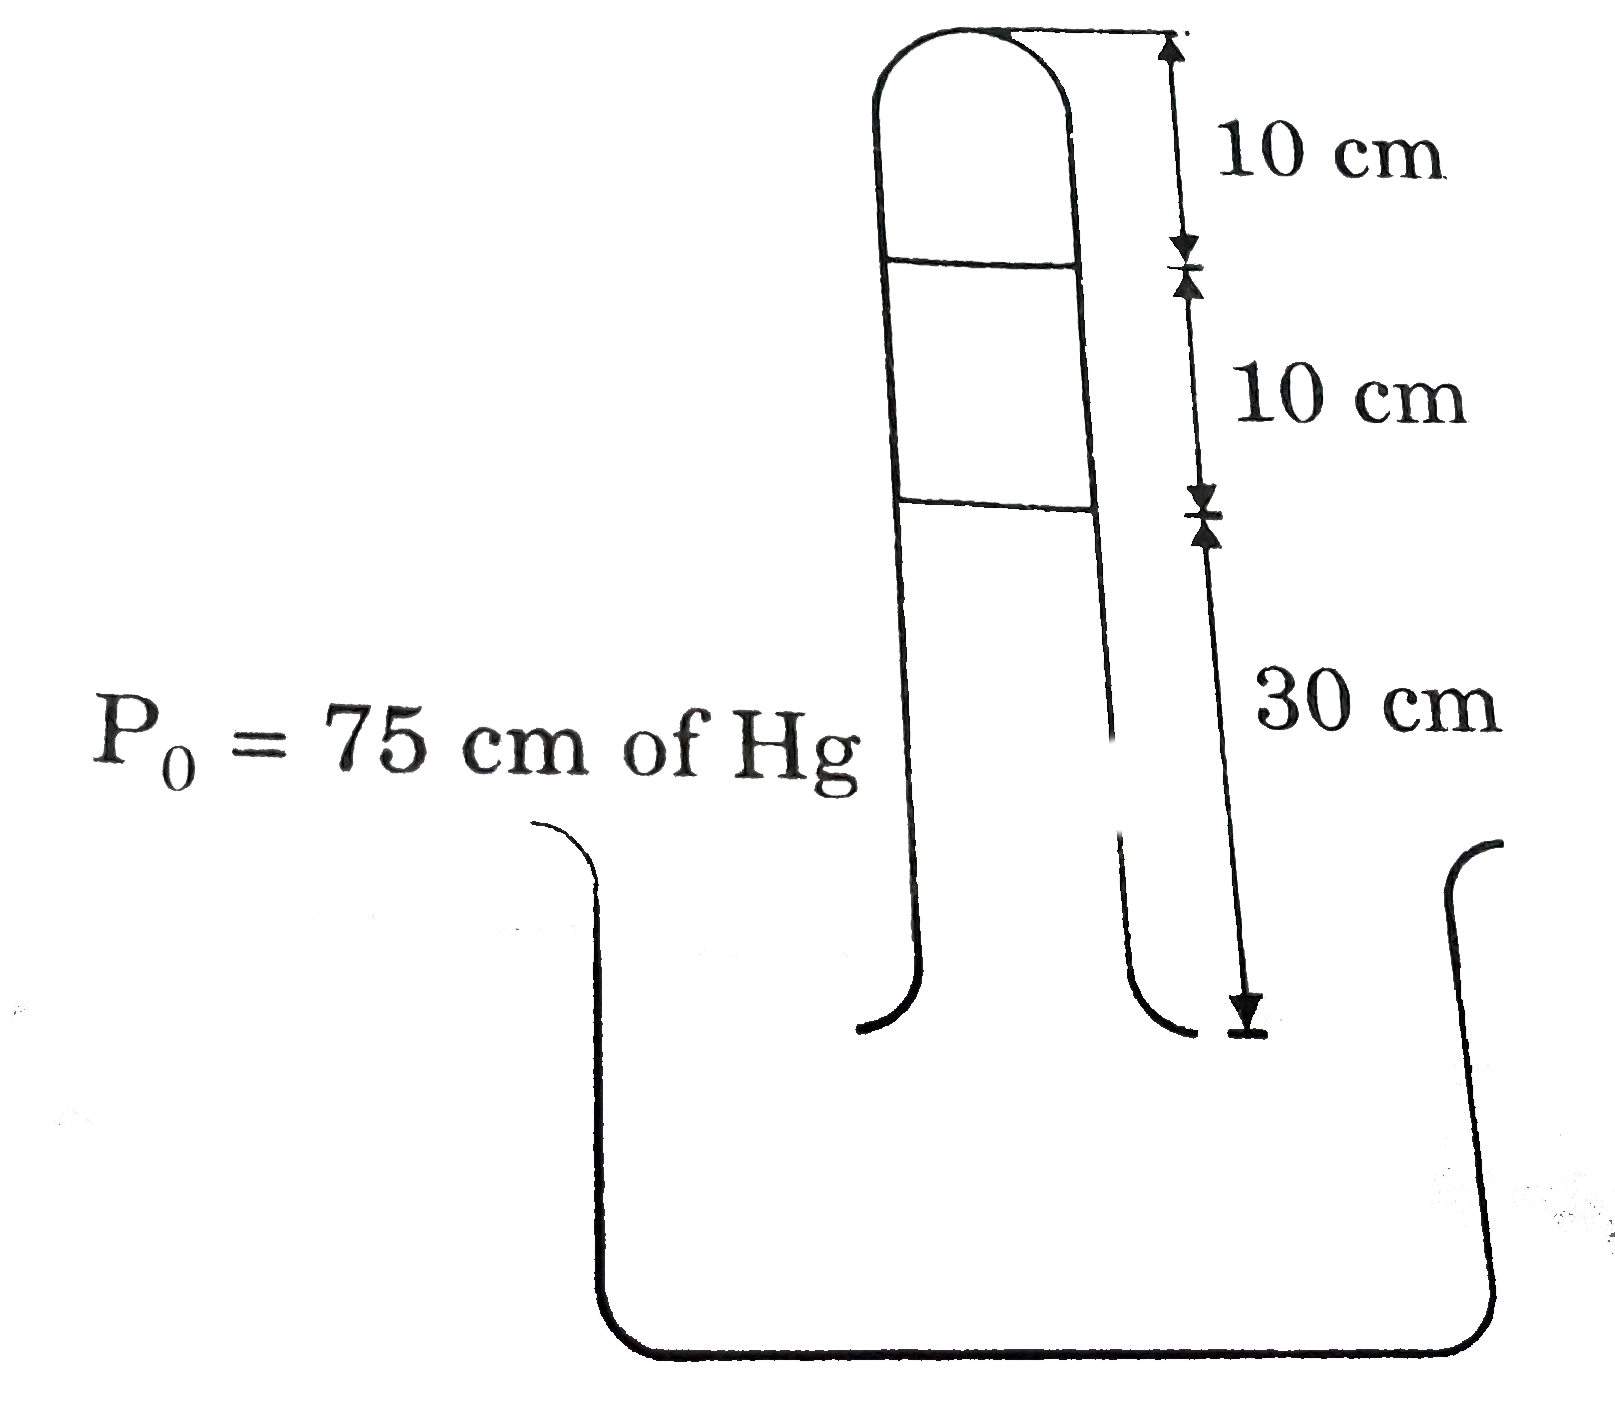 A tube of length 50 cm is containing a gas in two secitons separated by a mercury column of length 10 cm as shown in figure. The tube's open end is just inside the Hg surface in container, find pressure of gas in upper section. [Assume atmospheric pressure = 75 cm of Hg column]